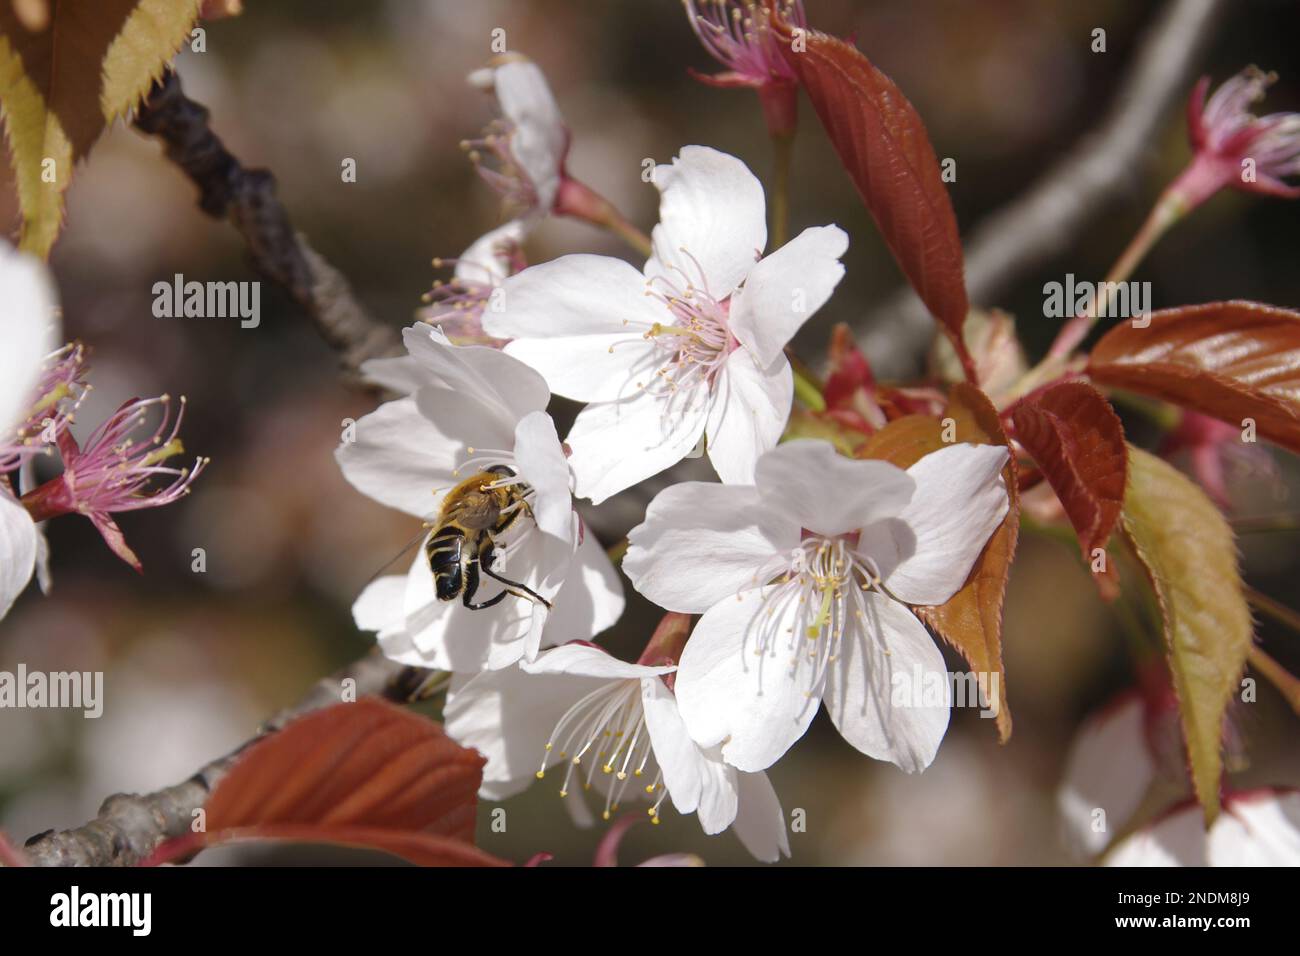 Bee and cherry blossom Stock Photo